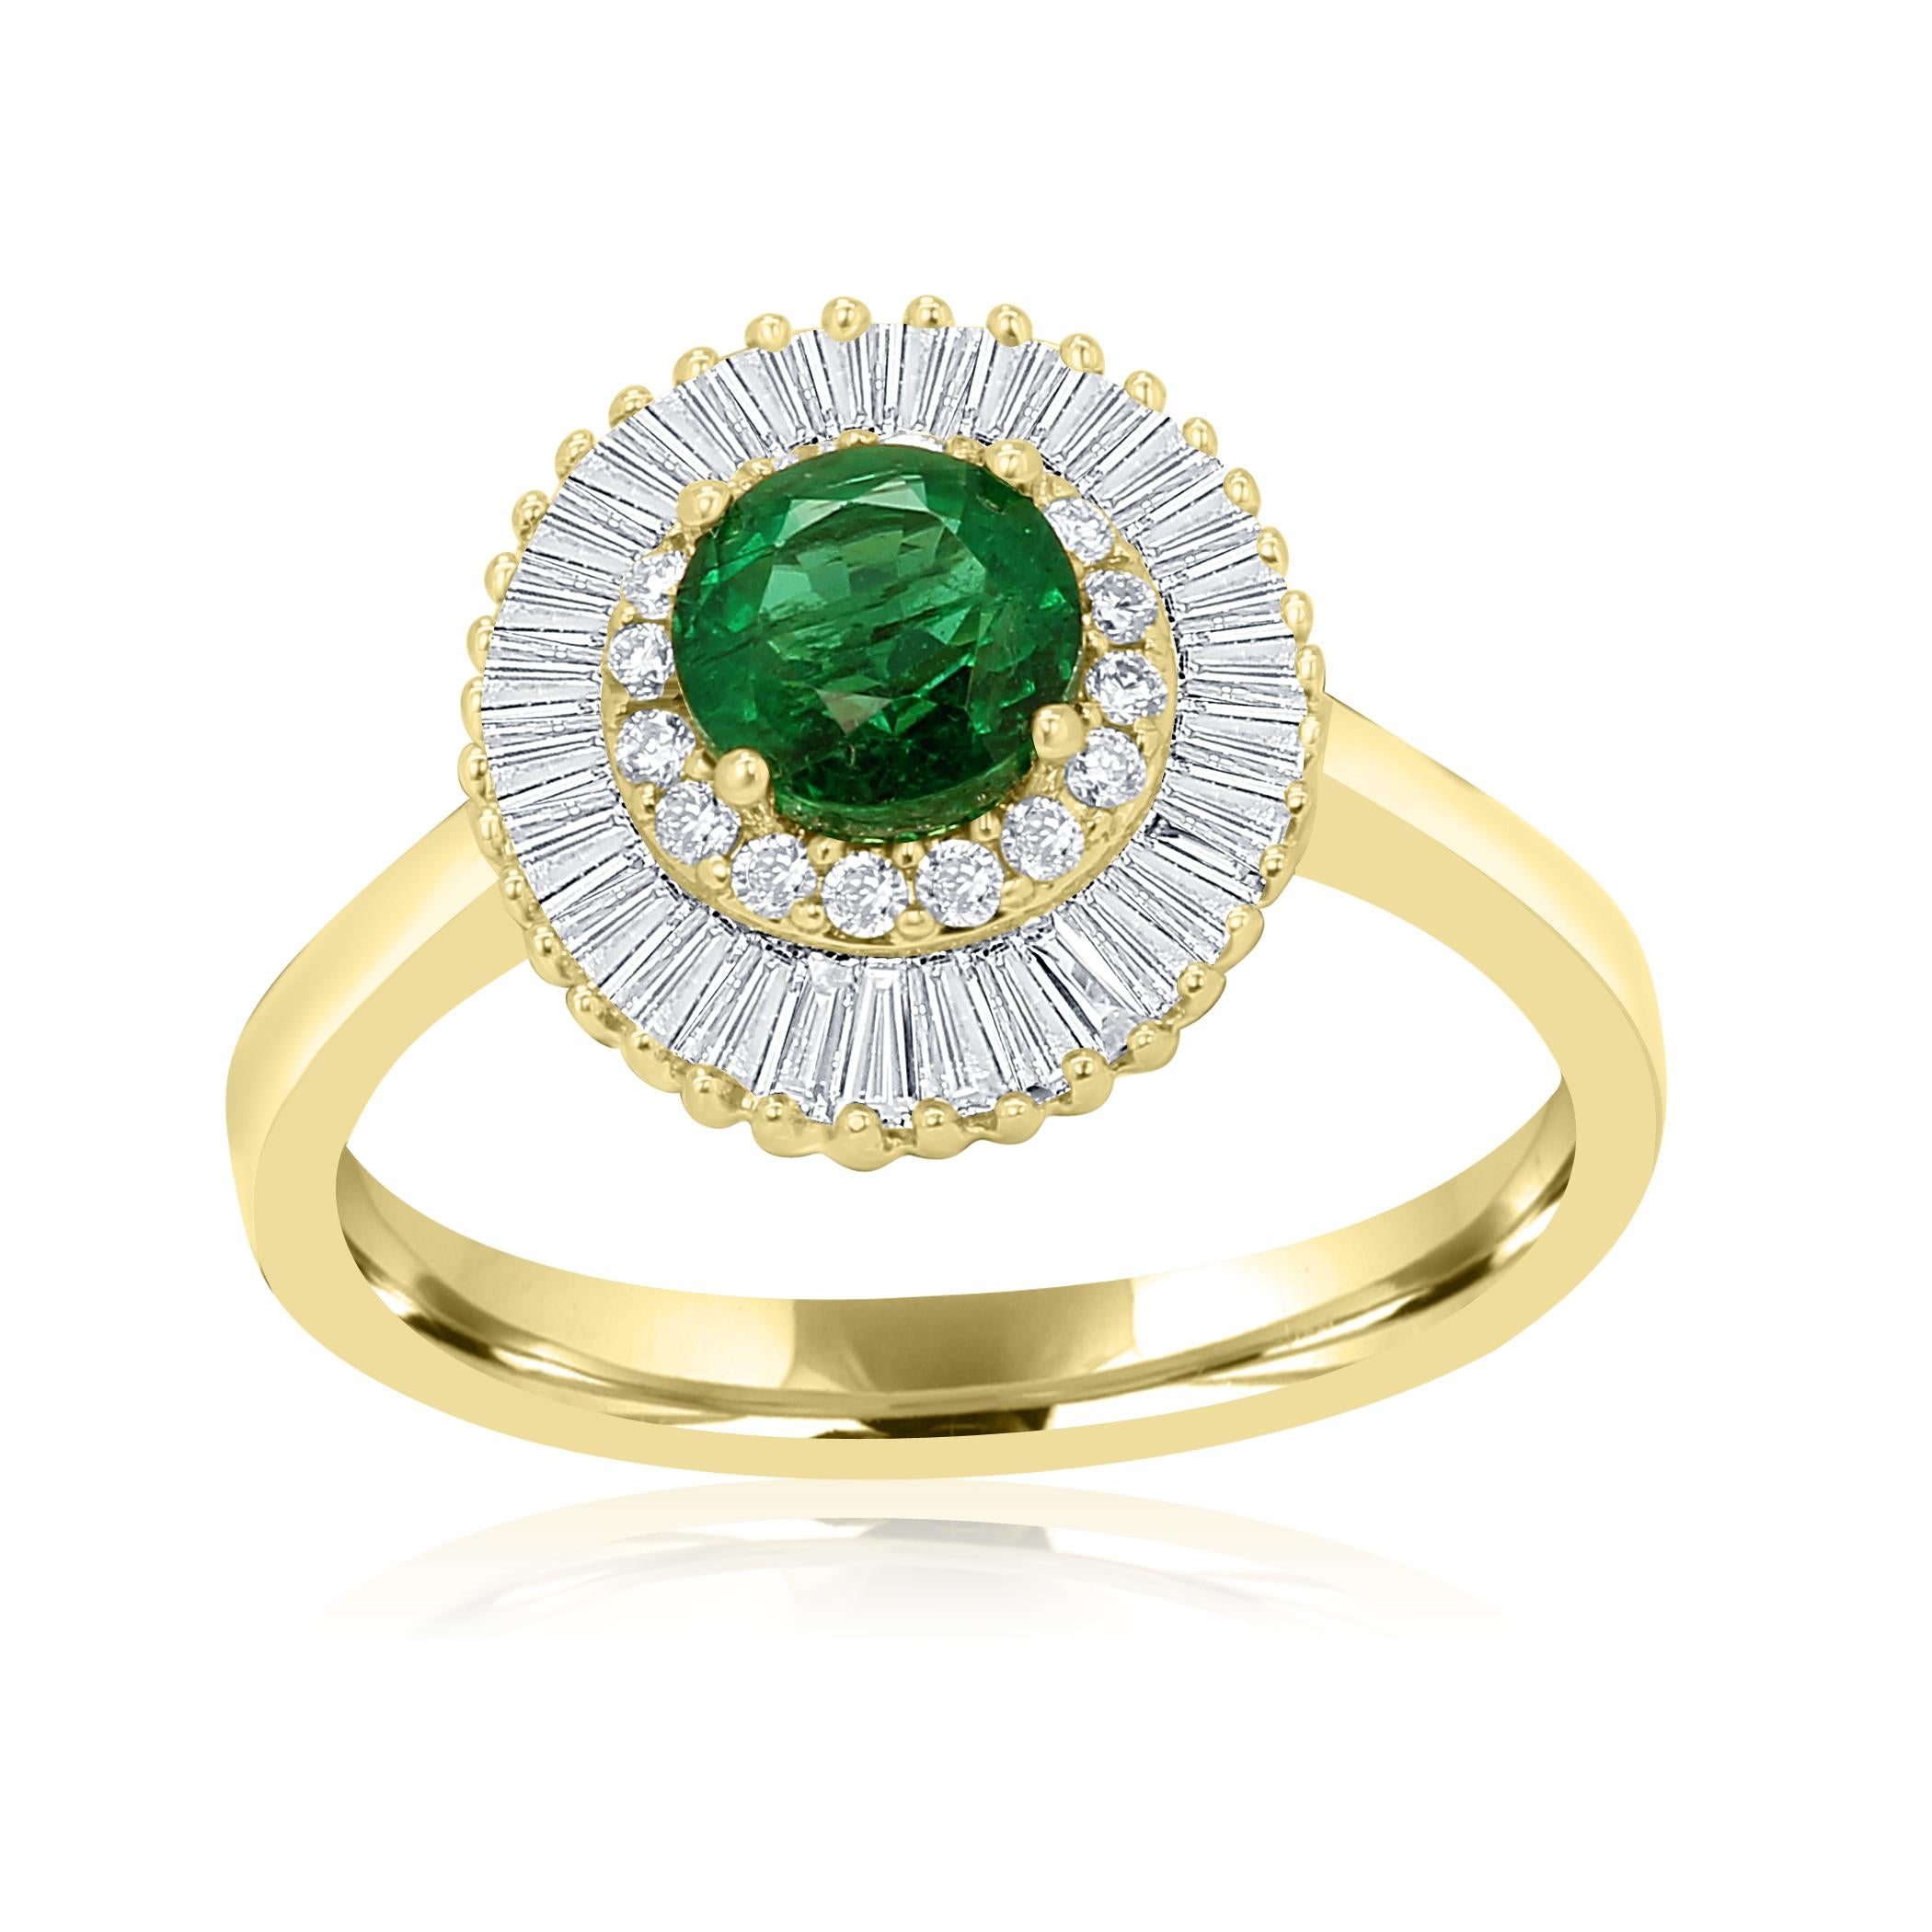 Emerald round 0.81 Carat Encircled in Double Halo of Colorless Round Brilliant VS SI clarity 0.11 Carat and Colorless Diamond Baguettes VS clarity 0.46 Carat in 14K Yellow Gold Bridal Cocktail Ballerina Art Deco Ring.

Total Stone weight 1.38